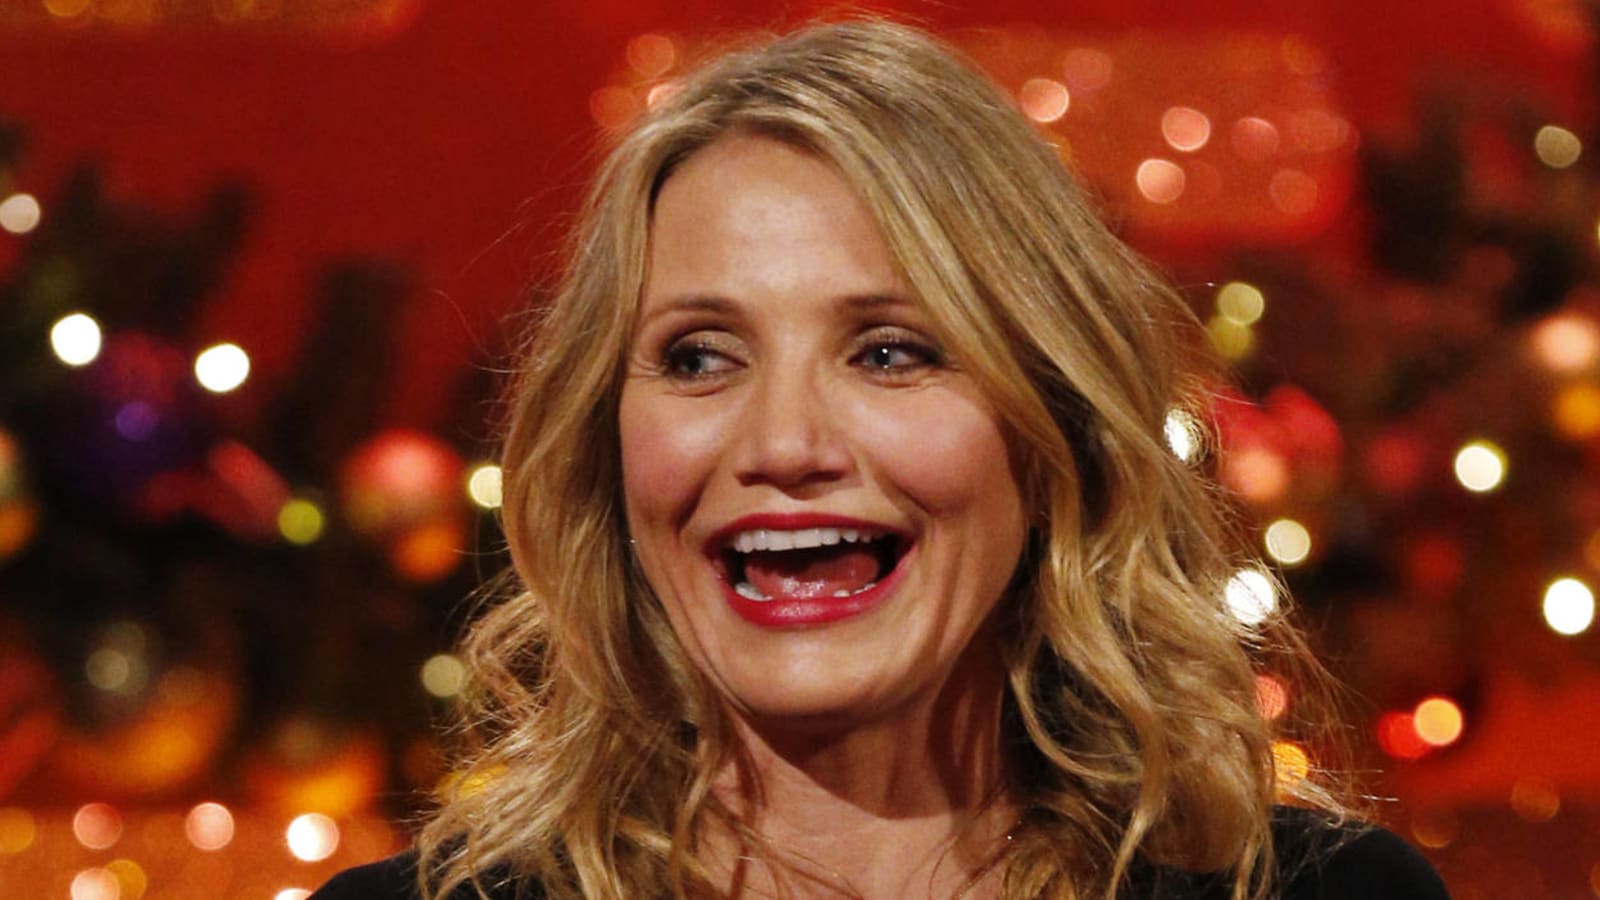 Cameron Diaz isn't actively pursing acting, but 'never say never'